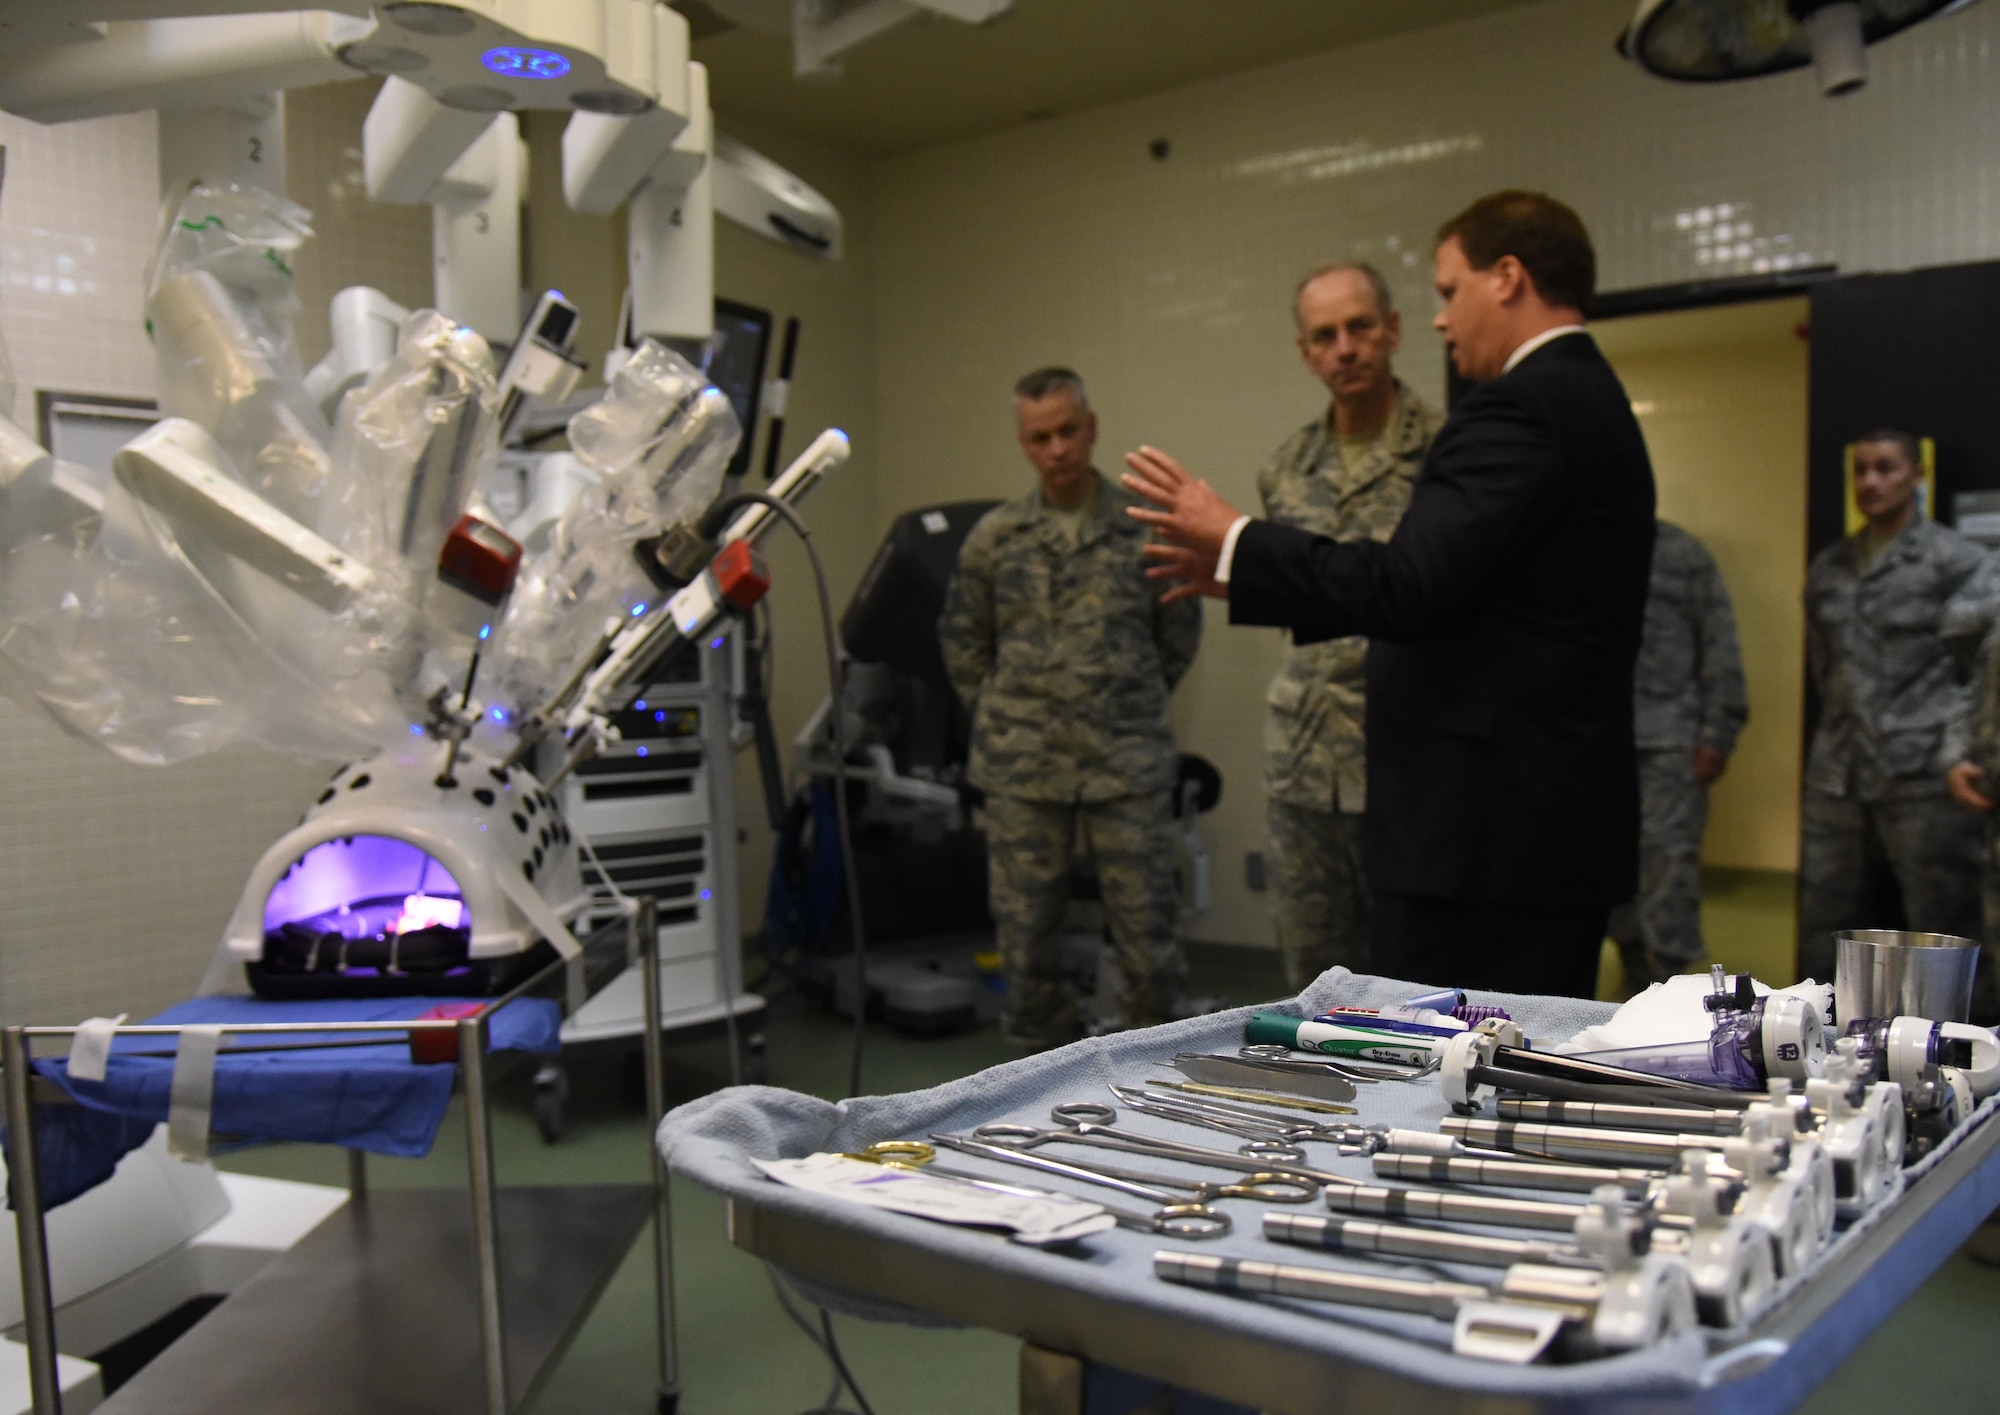 Blaise Provitola, Intuitive Surgical Inc. area sales manager, briefs on the capabilities of robotics surgery to Lt. Gen. Mark Ediger, Air Force Surgeon General, and Chief Master Sgt. Steve Cum, Jr., Air Force Surgeon General medical enlisted force chief, during a visit to the clinical research laboratory  Oct. 17, 2017, on Keesler Air Force Base, Mississippi. The purpose of Ediger’s visit was to get familiar with the 81st Medical Group’s mission, operations and personnel. During his tour, he visited more than 10 different units in the 81st MDG to include mammography, emergency department, radiology and oncology, genetics and the clinical research laboratory. (U.S. Air Force photo by Kemberly Groue)